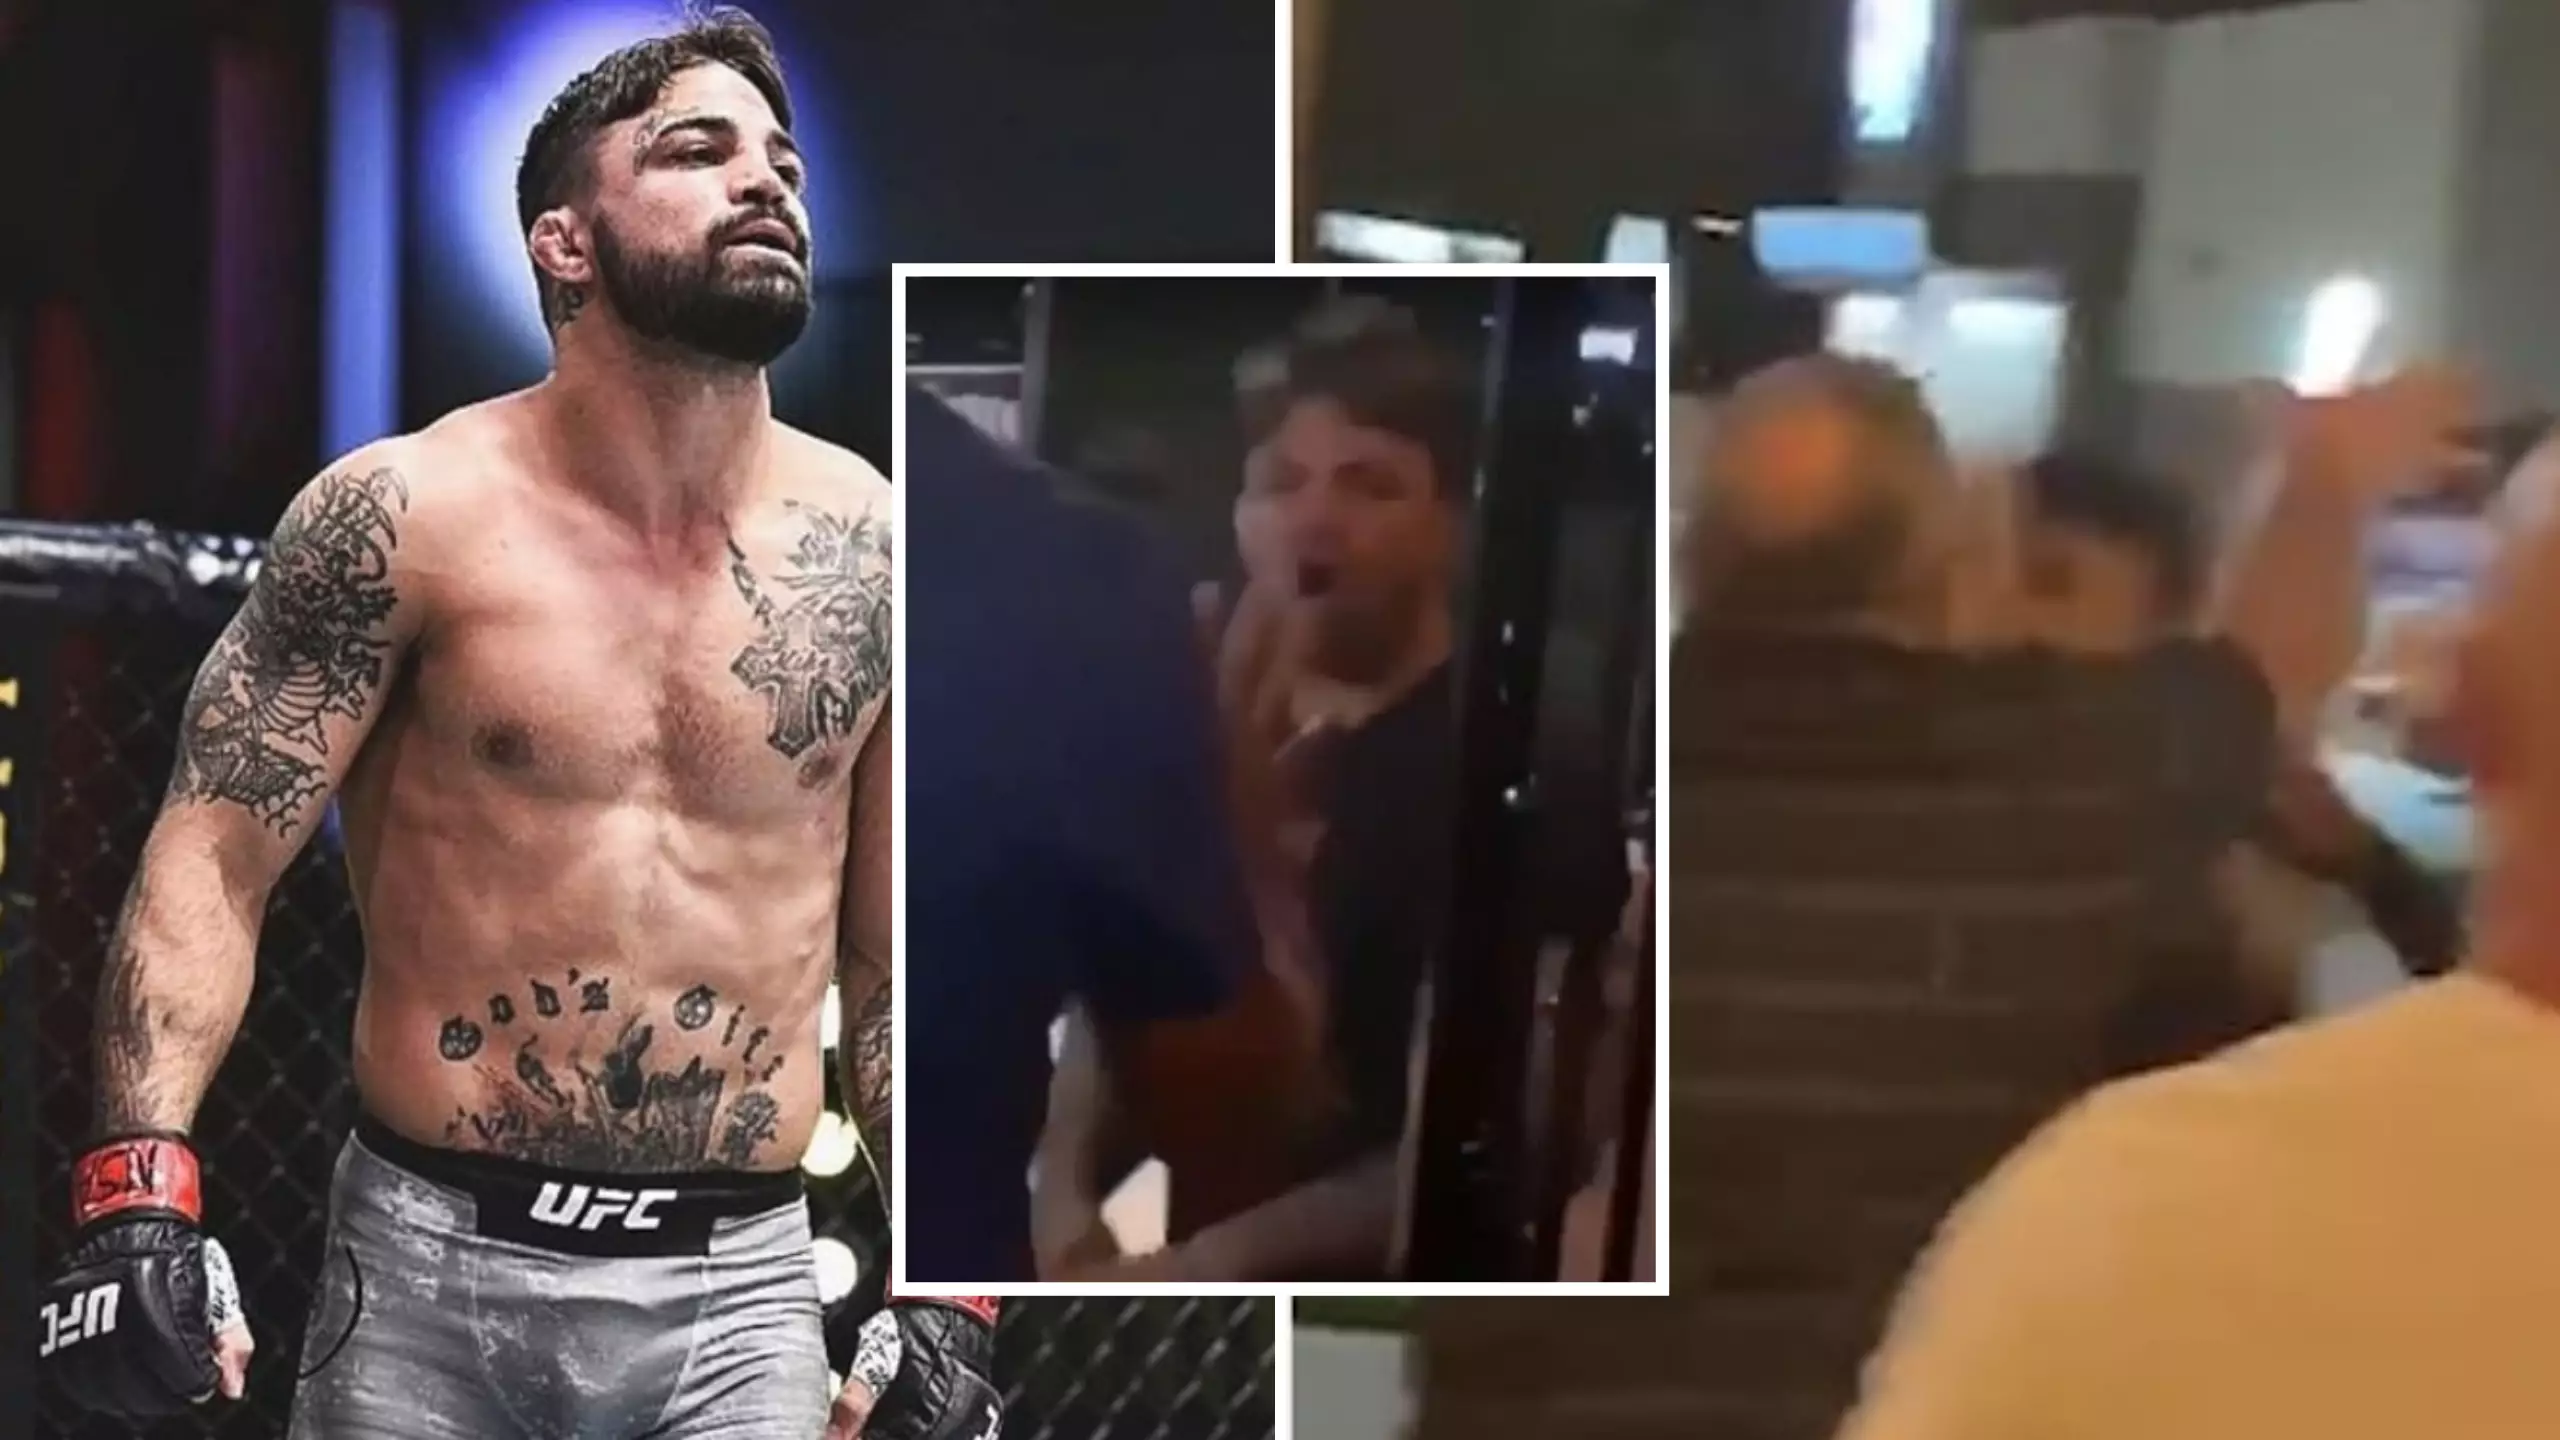 UFC Star Mike Perry Makes Public Apology After Punching Older Man In Bar Dispute